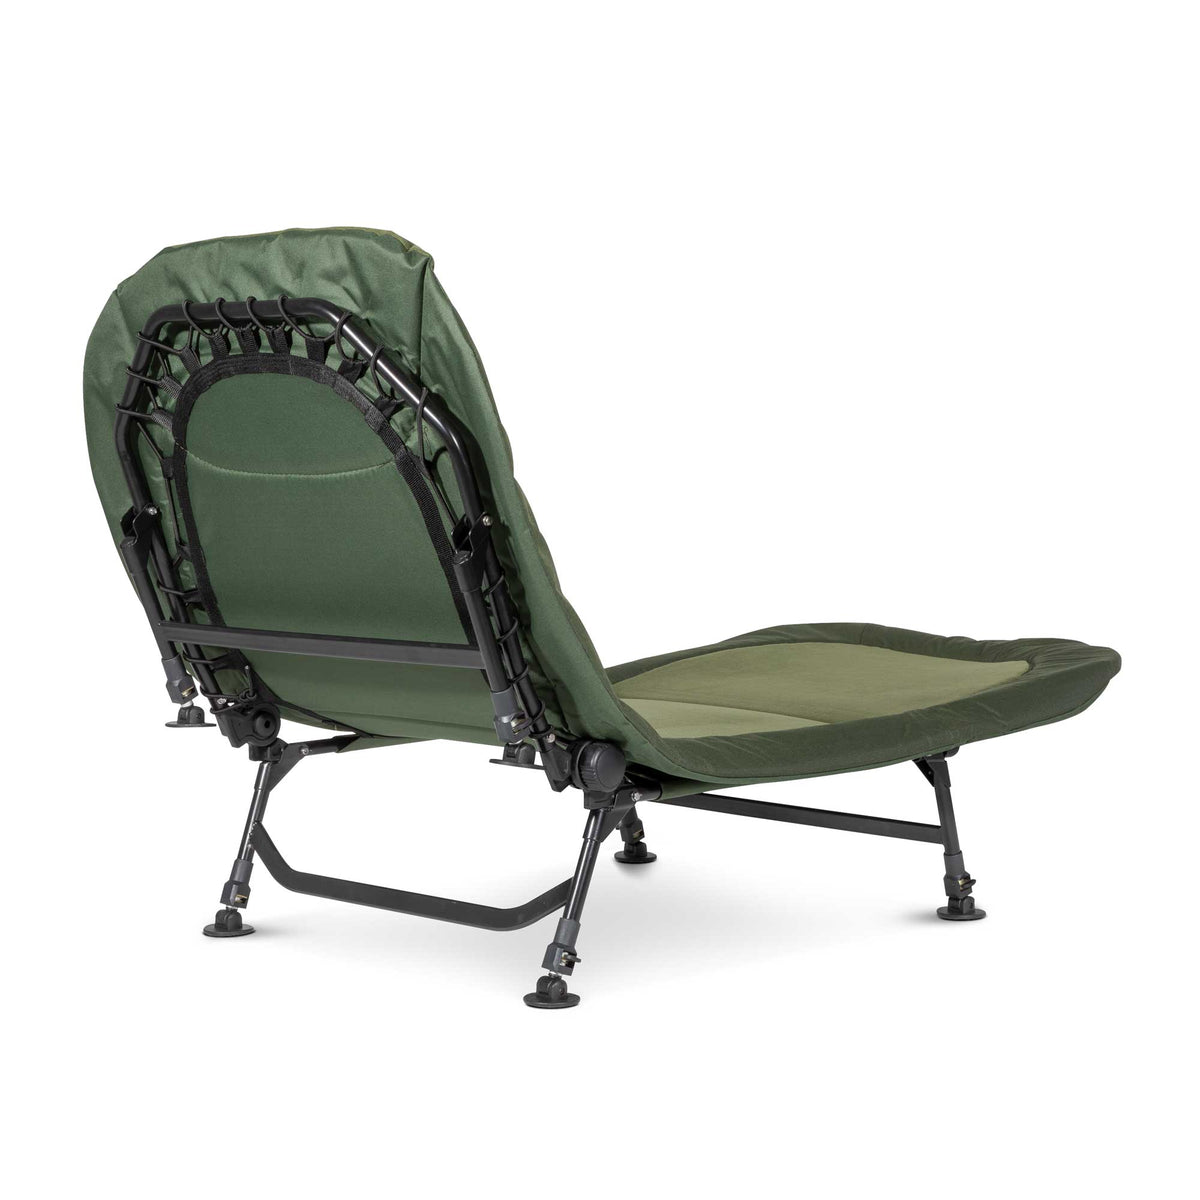 Dellonda Portable Fishing Chair, Reclining, Water Resistant, Adjustable -  DL74